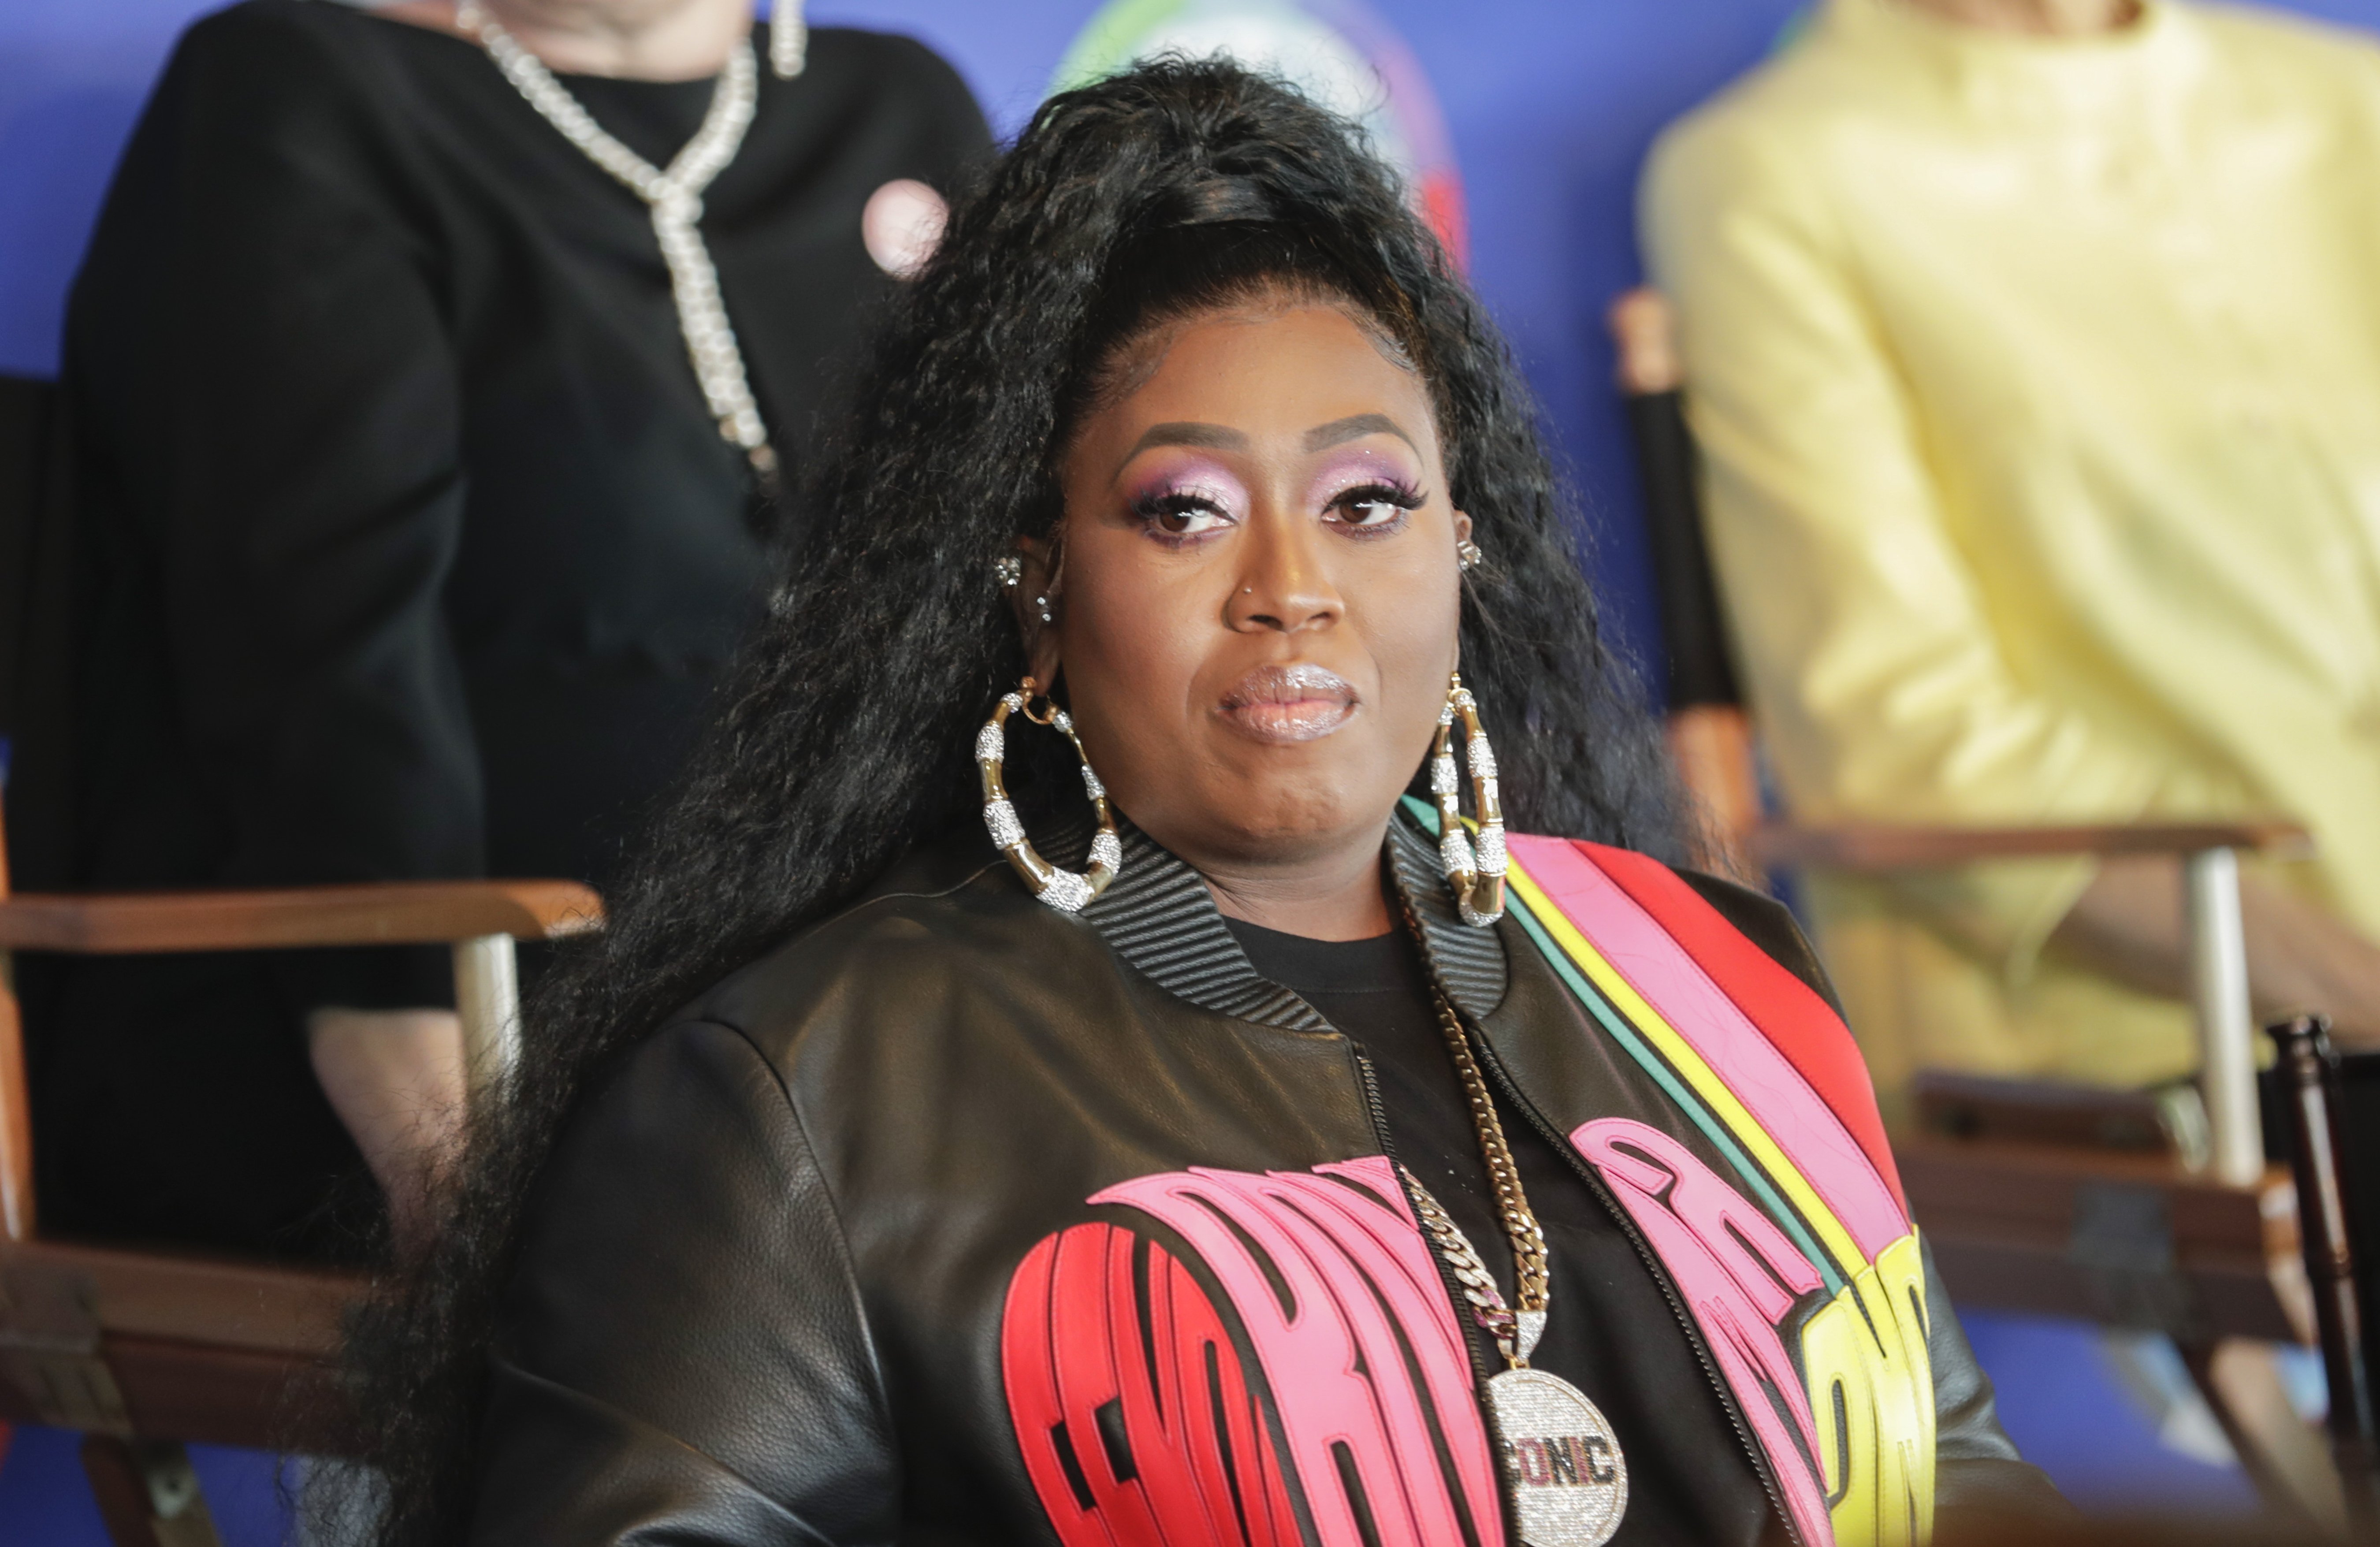 Missy Elliott speaks during Women's Entrepreneurship Day (WED) at the UN Headquarters in New York City, New York, November 15, 2019. | Photo: Getty Images